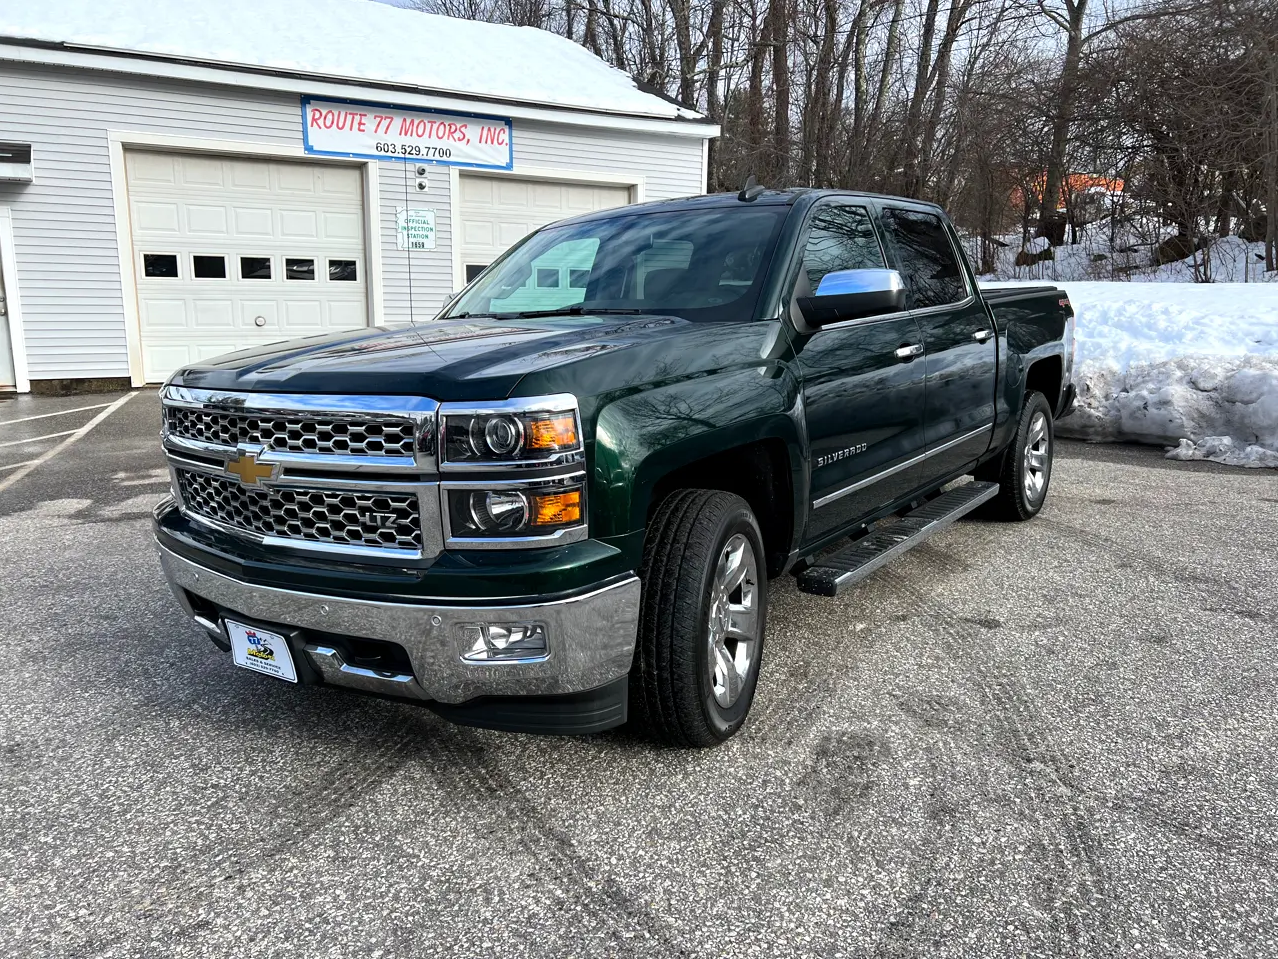 Southern Trucks Specials At Route 77 Motors!